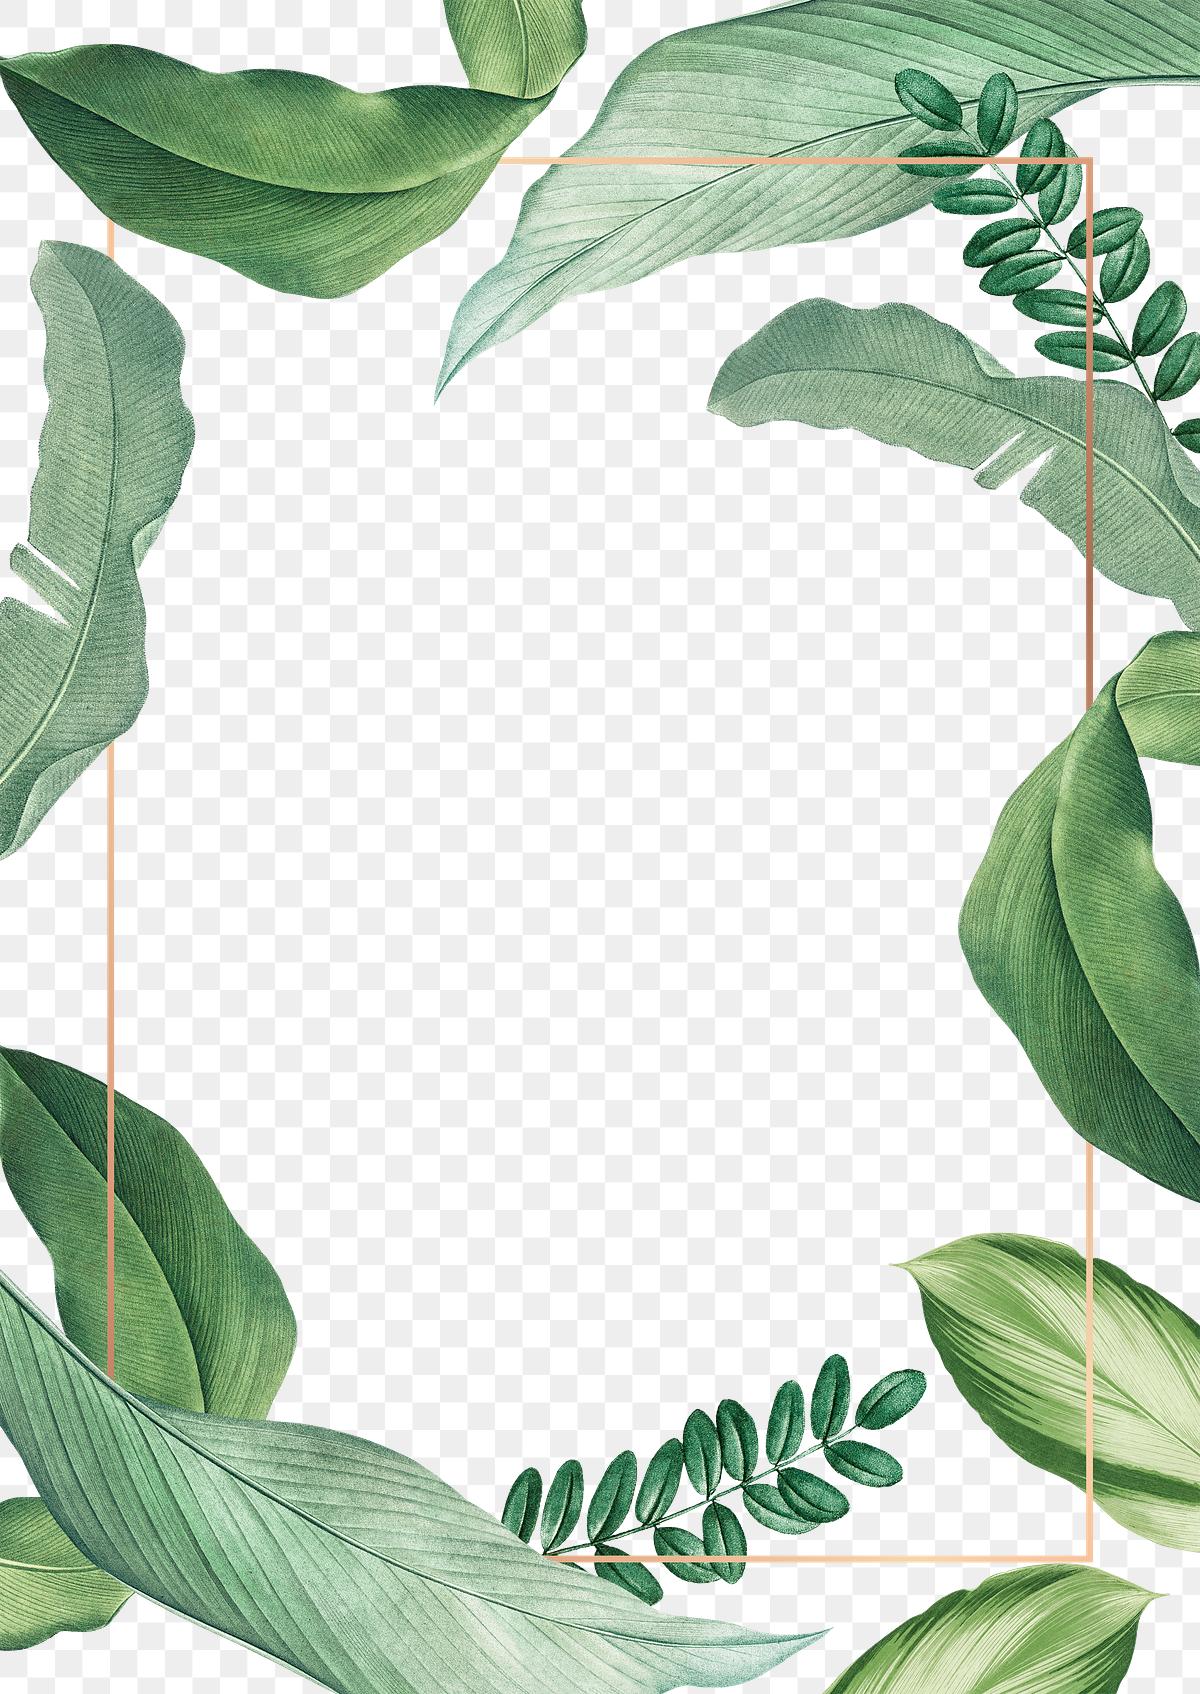 Vector Tropical Leaves Png - Great for your new graphic designs